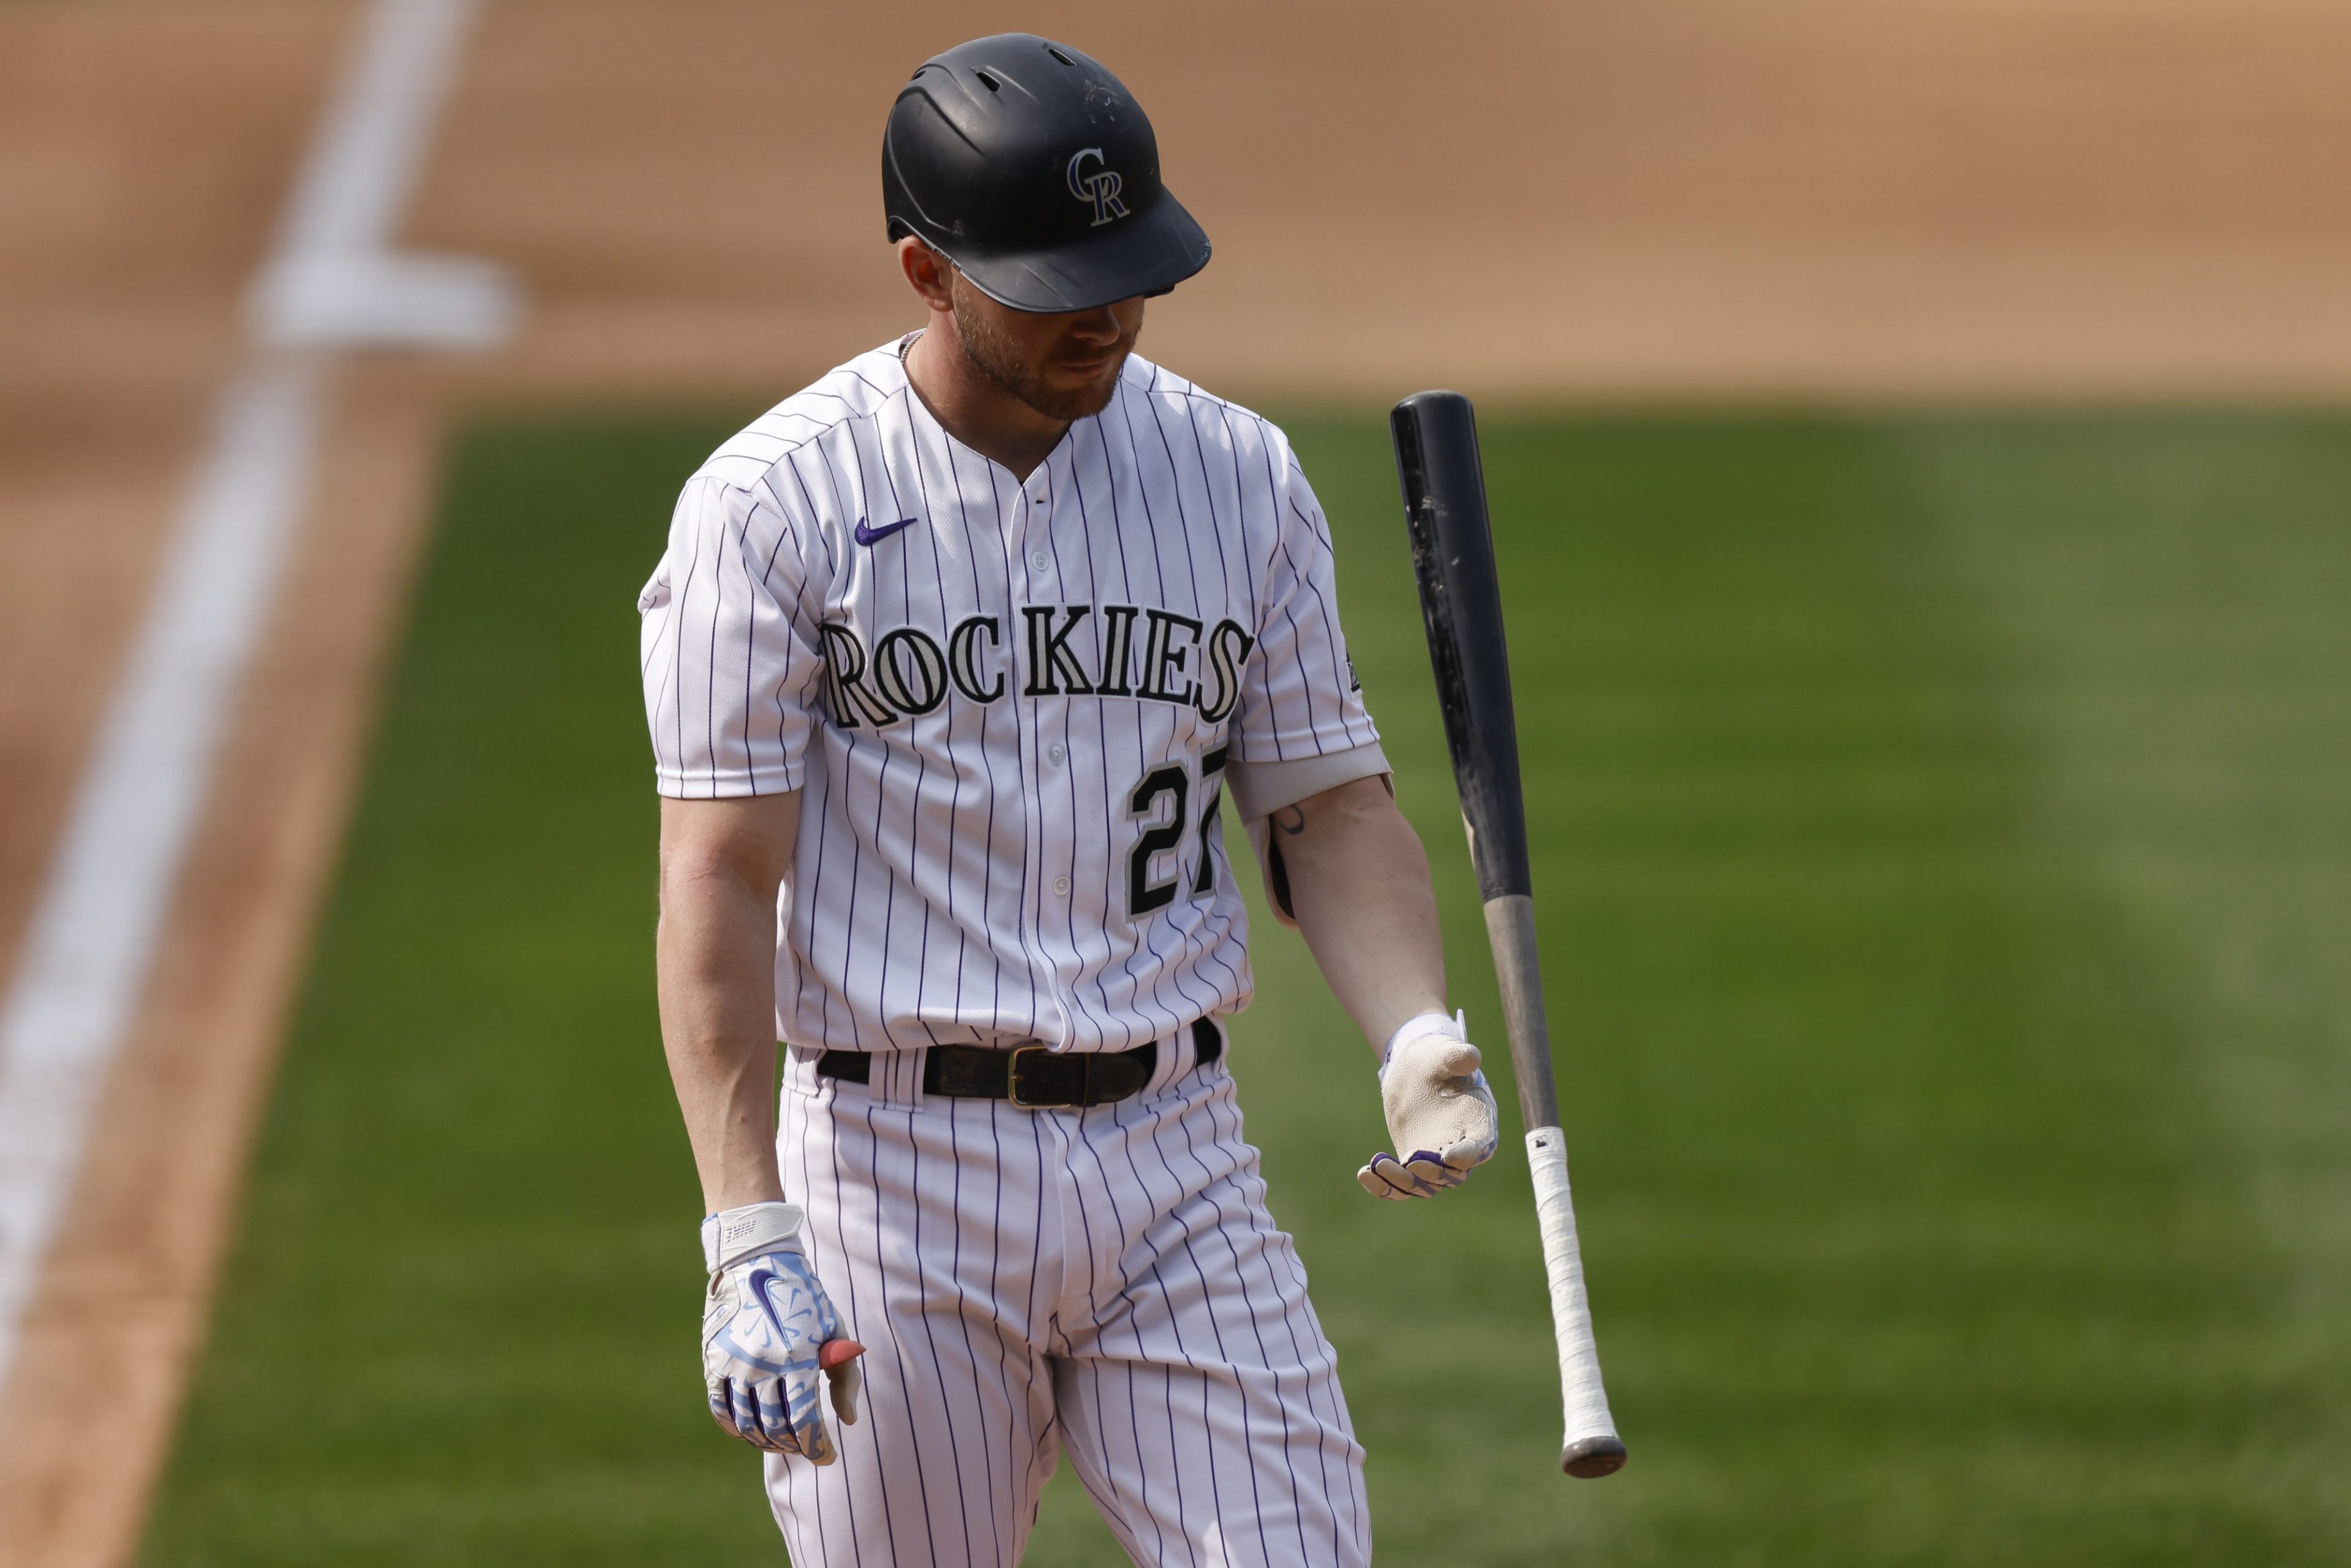 Rockies shortstop Trevor Story discards his bat after striking out.